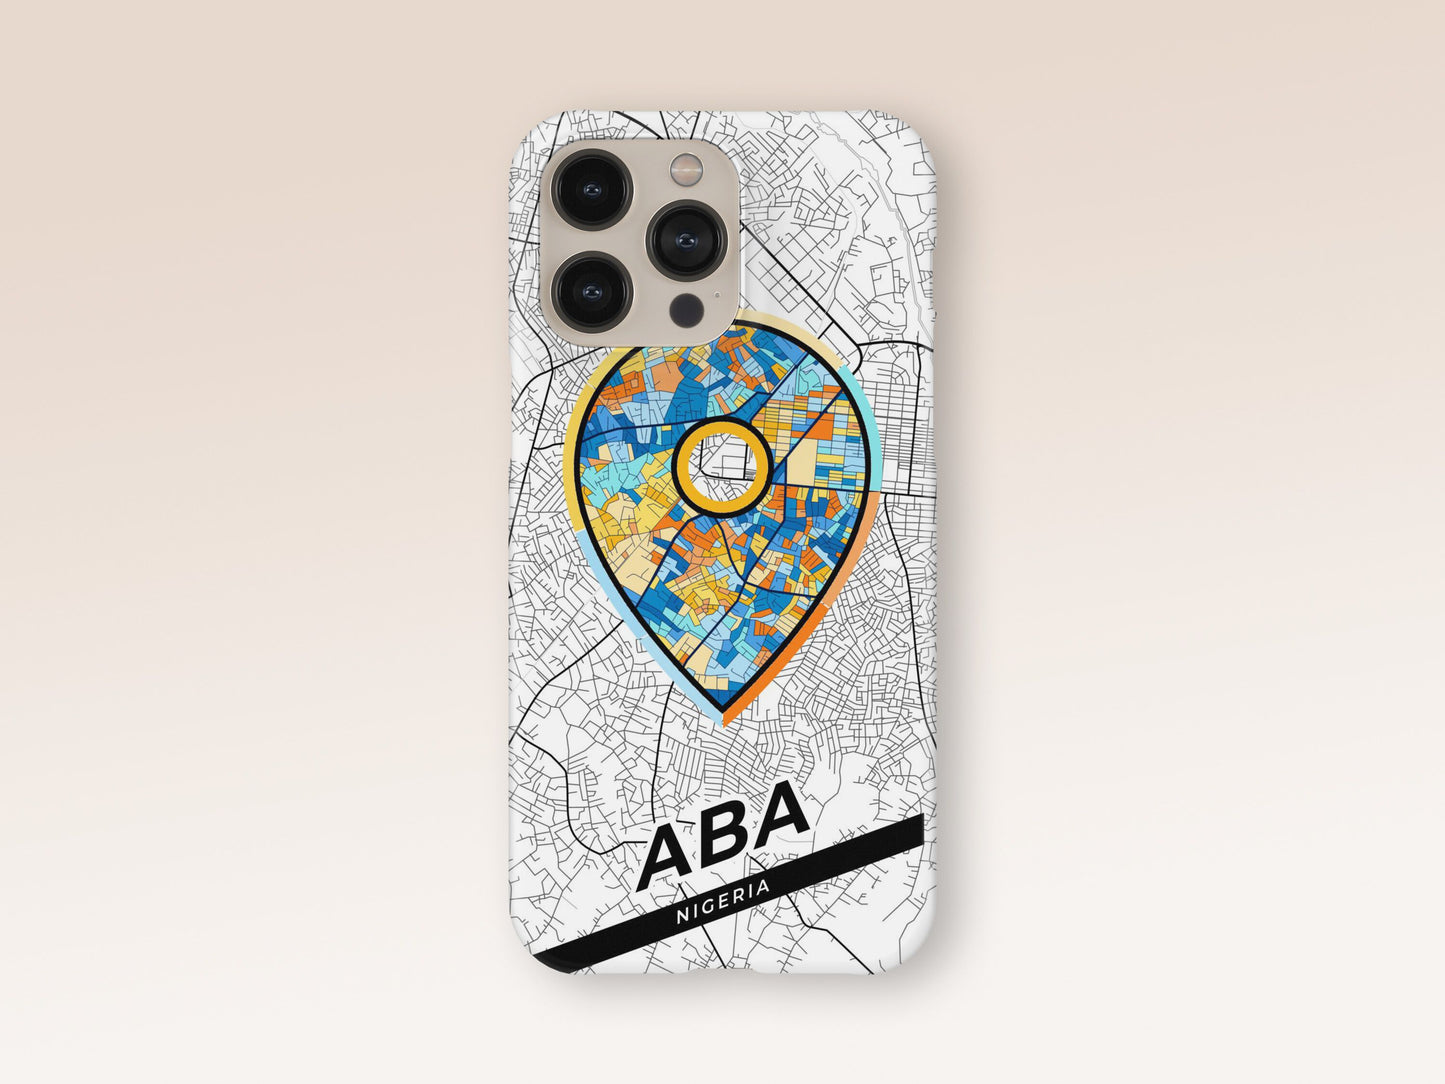 Aba Nigeria slim phone case with colorful icon. Birthday, wedding or housewarming gift. Couple match cases. 1